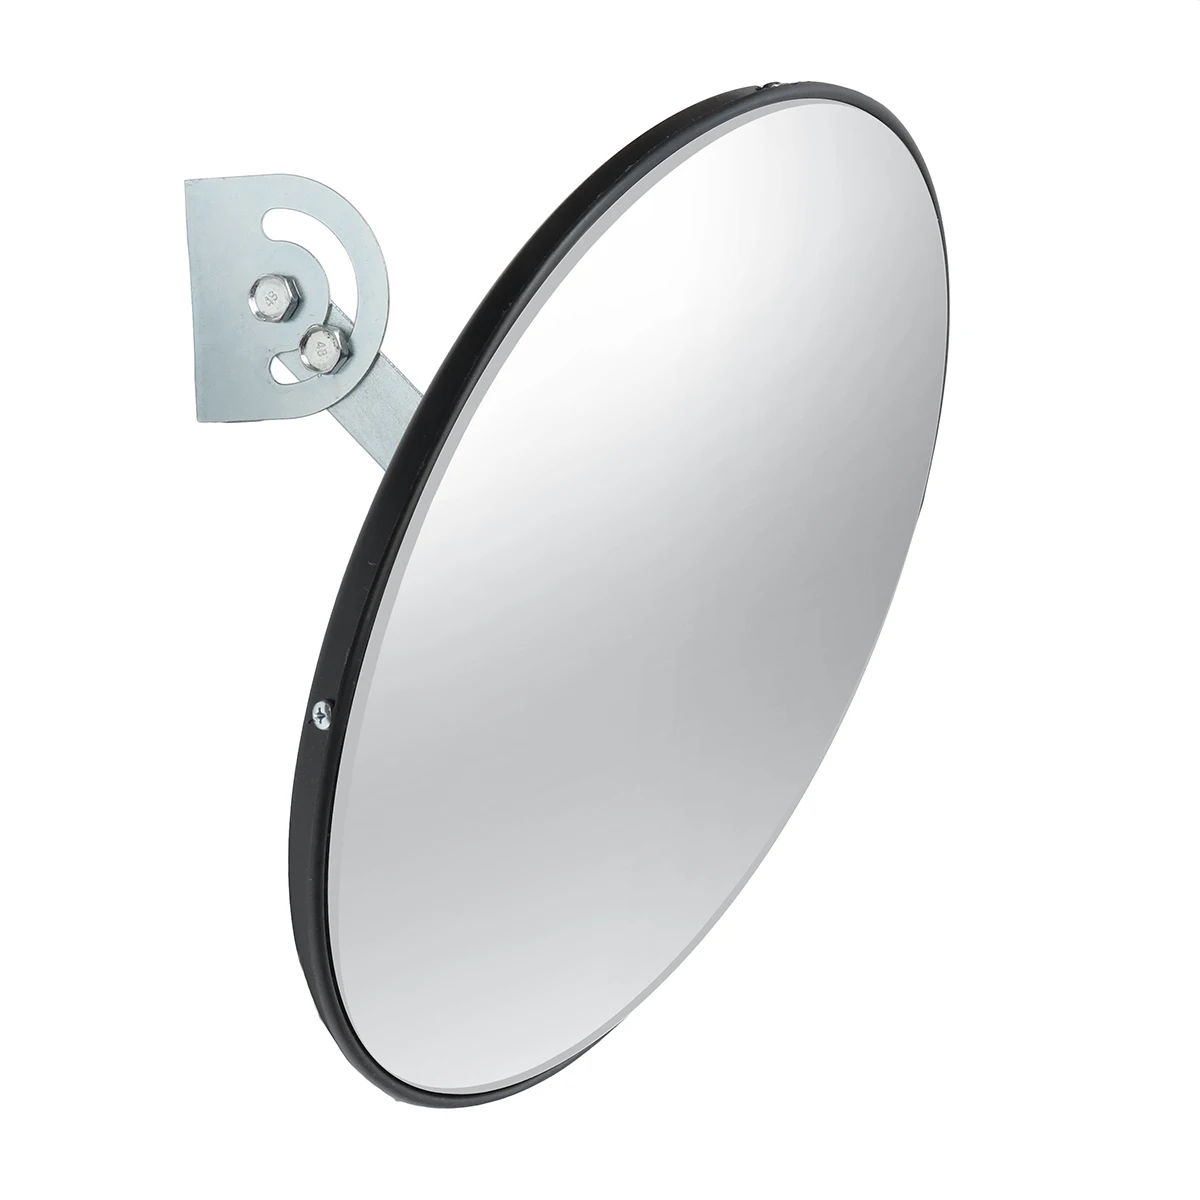 457123 Traffic Supermarket Wide Angle Security Curved Convex Road Mirror 45cm by Merry Tools